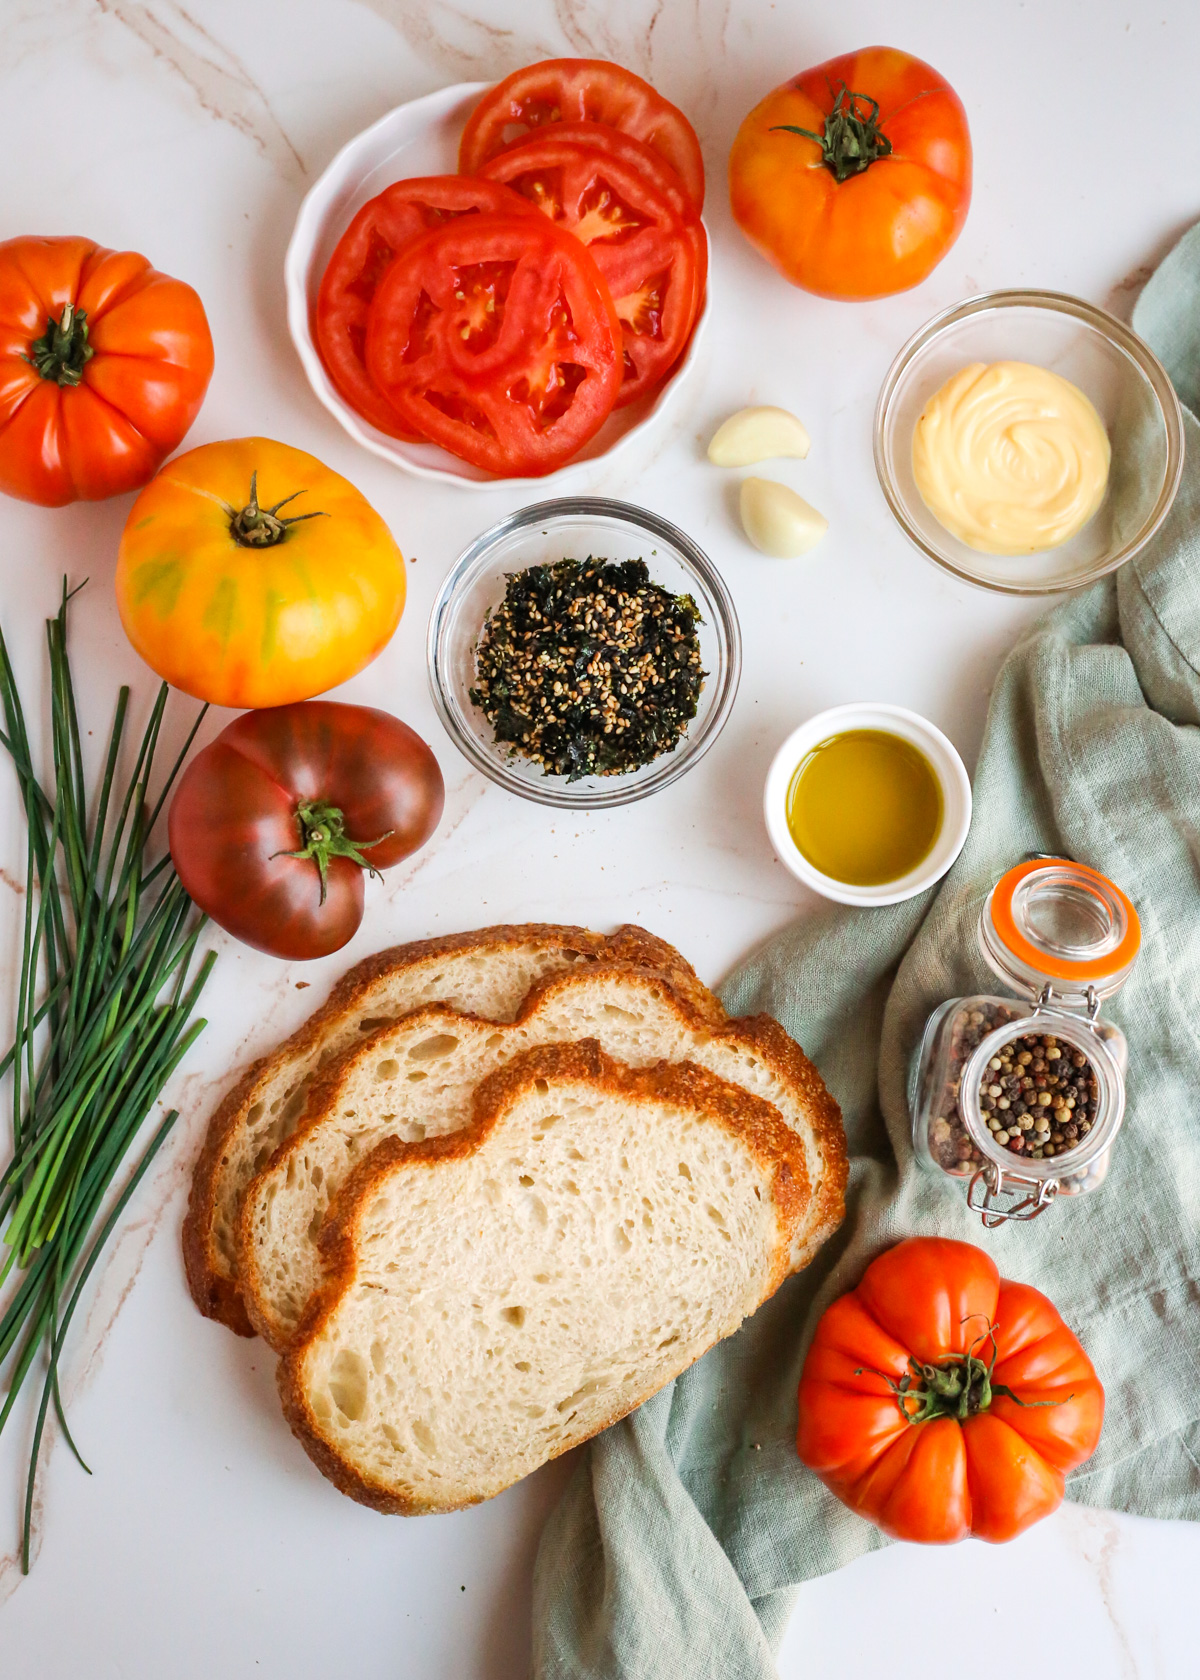 Flatlay style image of all the ingredients needed to make a Furikake Tomato toast recipe, displayed in various small prep bowls or ramekins on a beige countertop